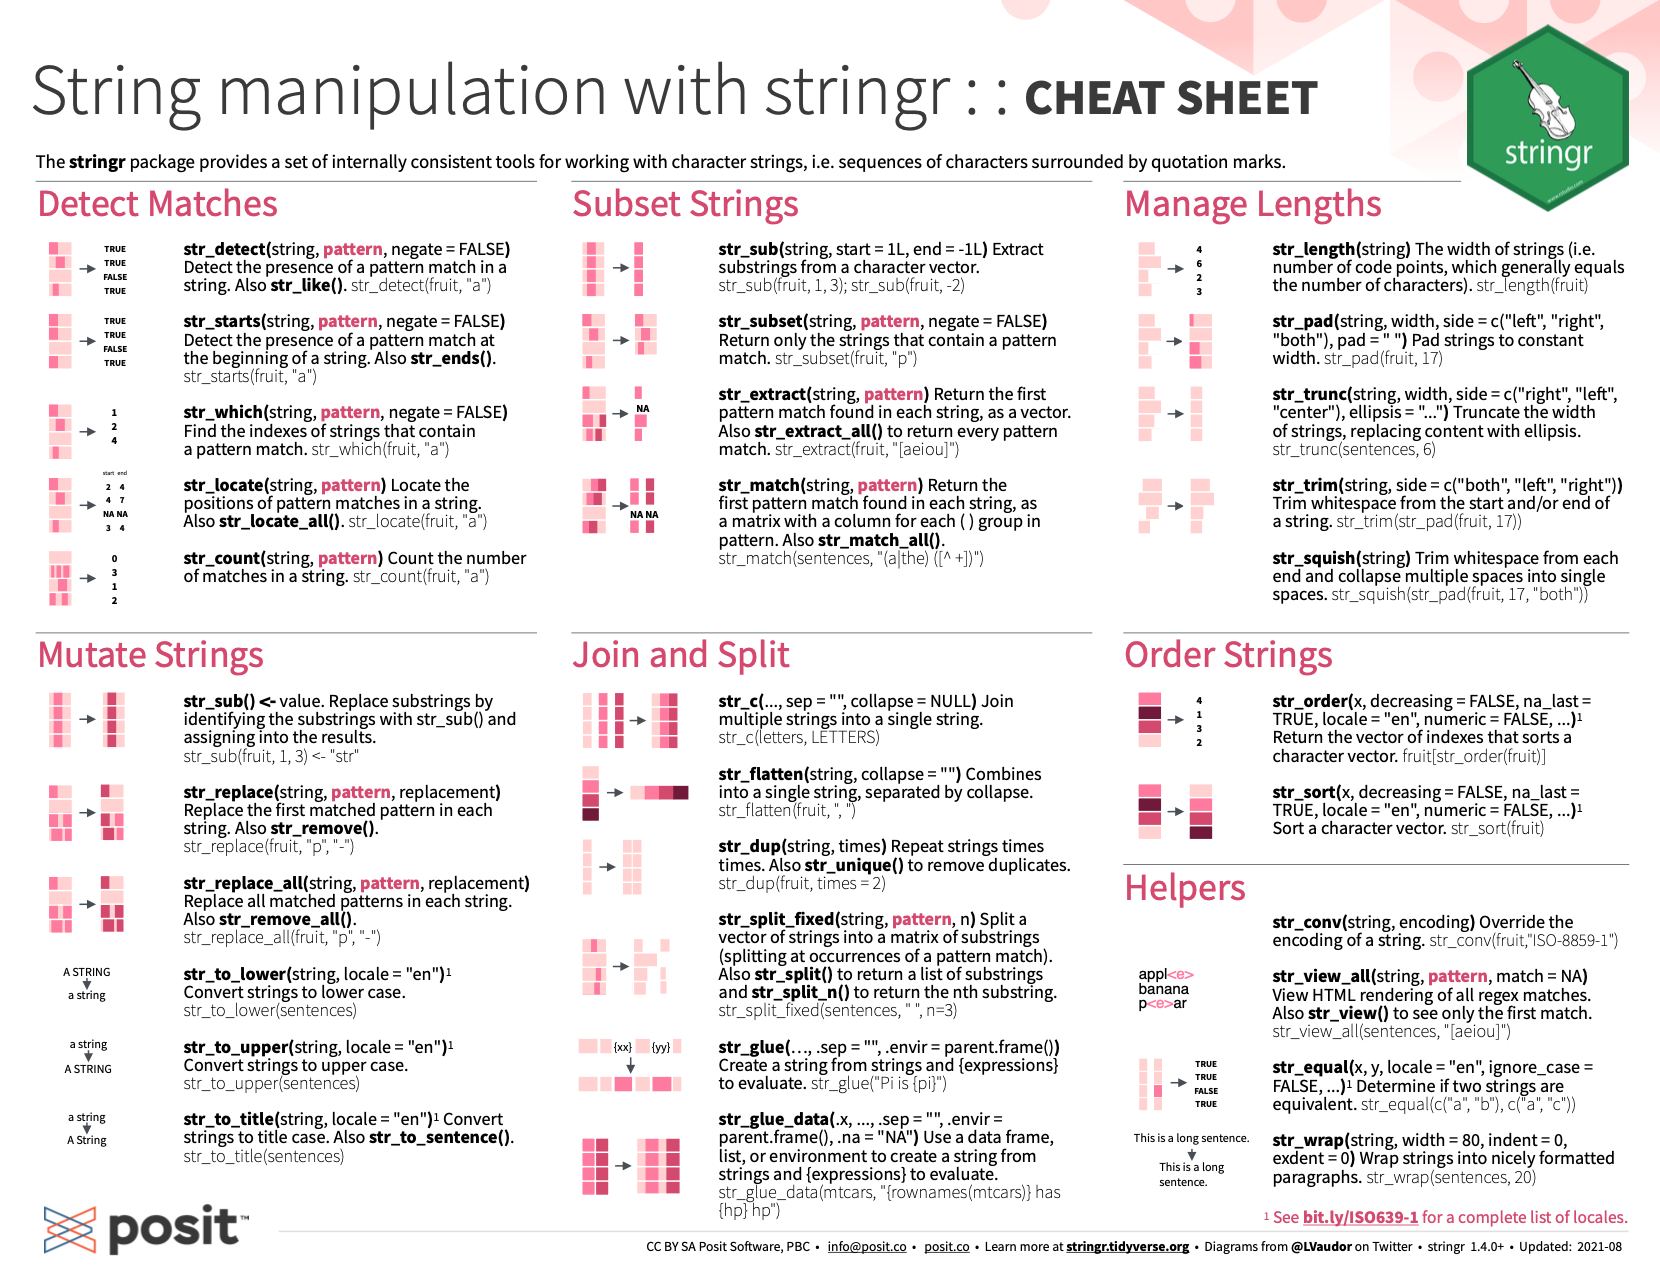 Text and string manipulation with **stringr** and regular expressions<br>from [RStudio cheatsheets](https://www.rstudio.com/resources/cheatsheets/).